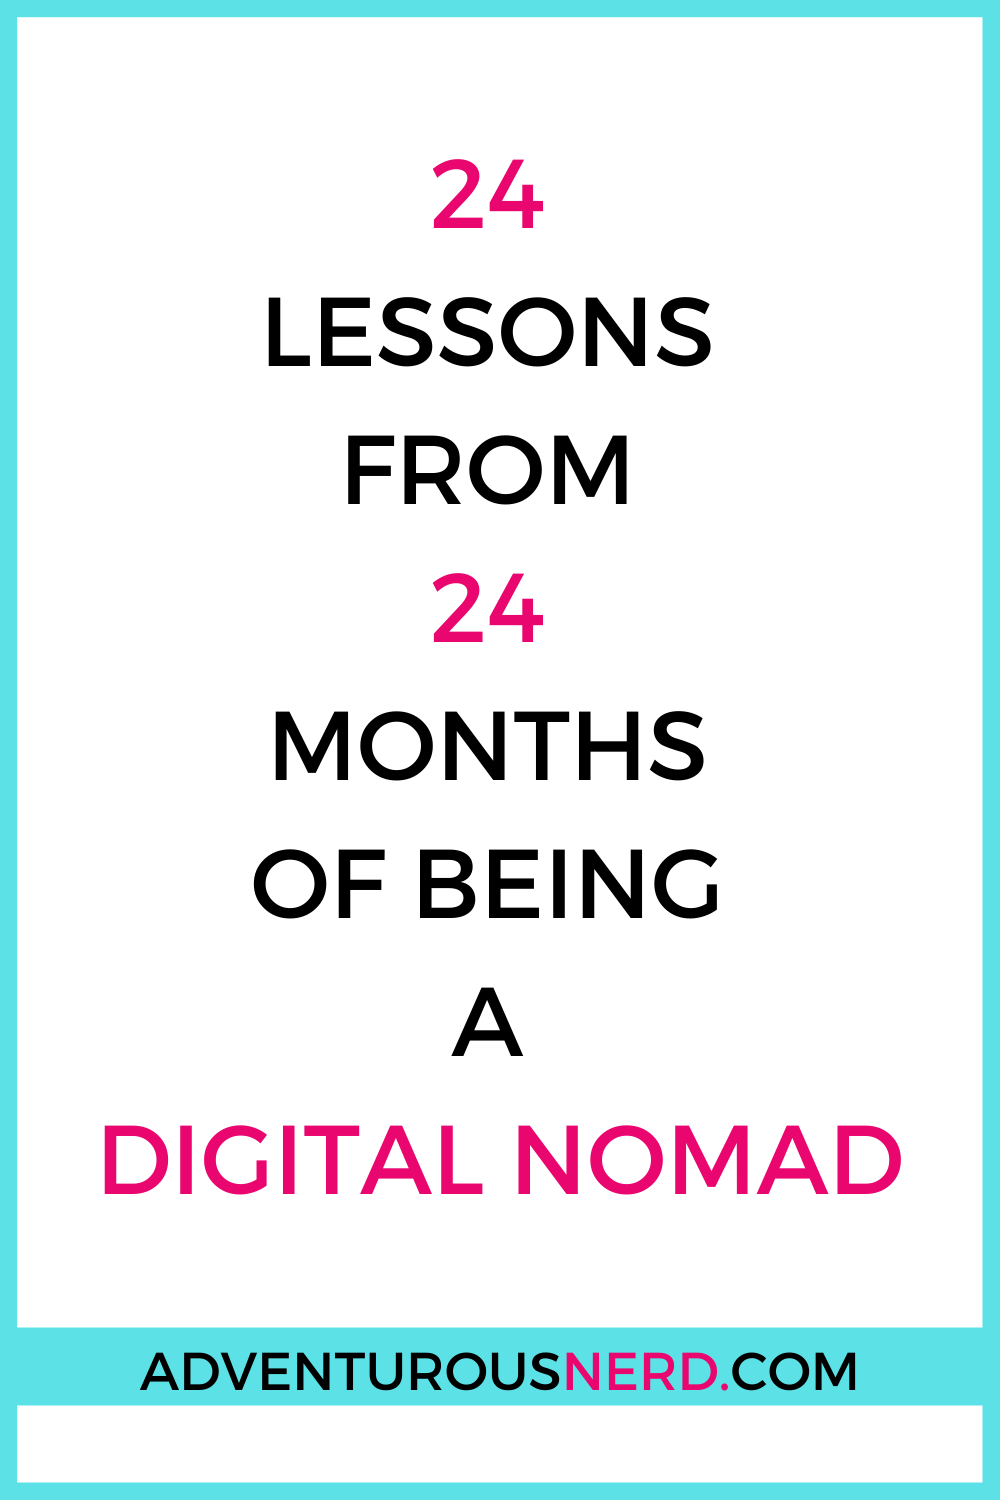 image of text box 24 lessons from 24 months of being a digital nomad